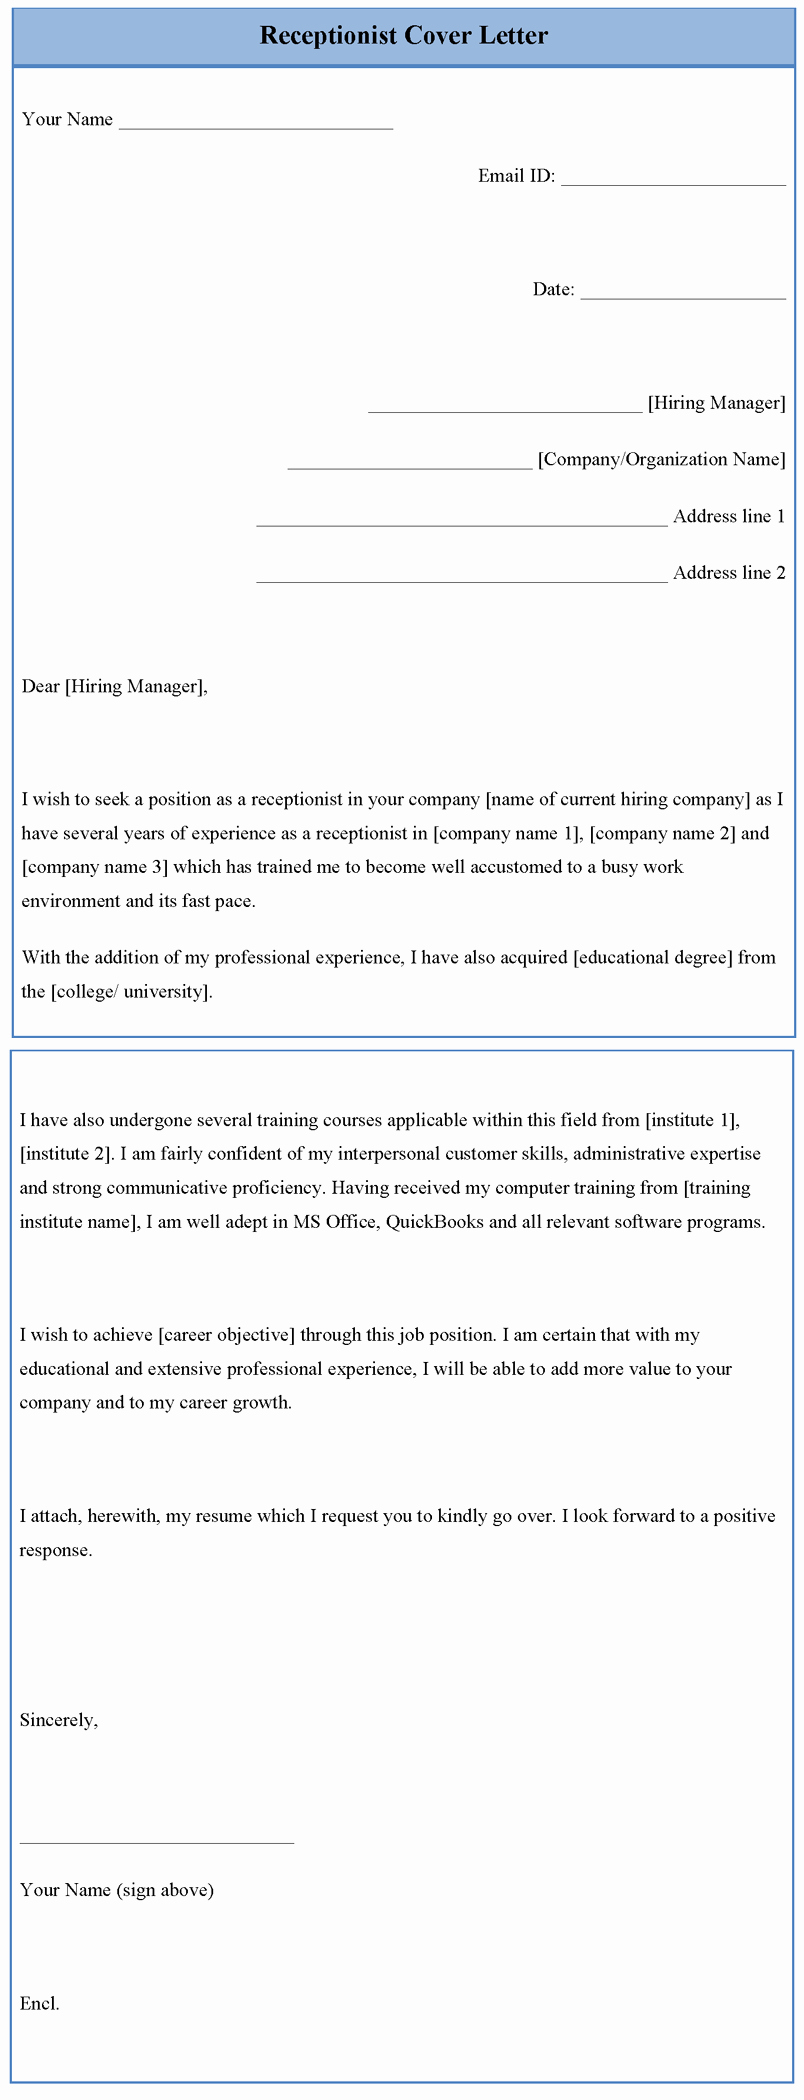 Cover Letter Template Receptionist Inspirational Receptionist Cover Letter Template